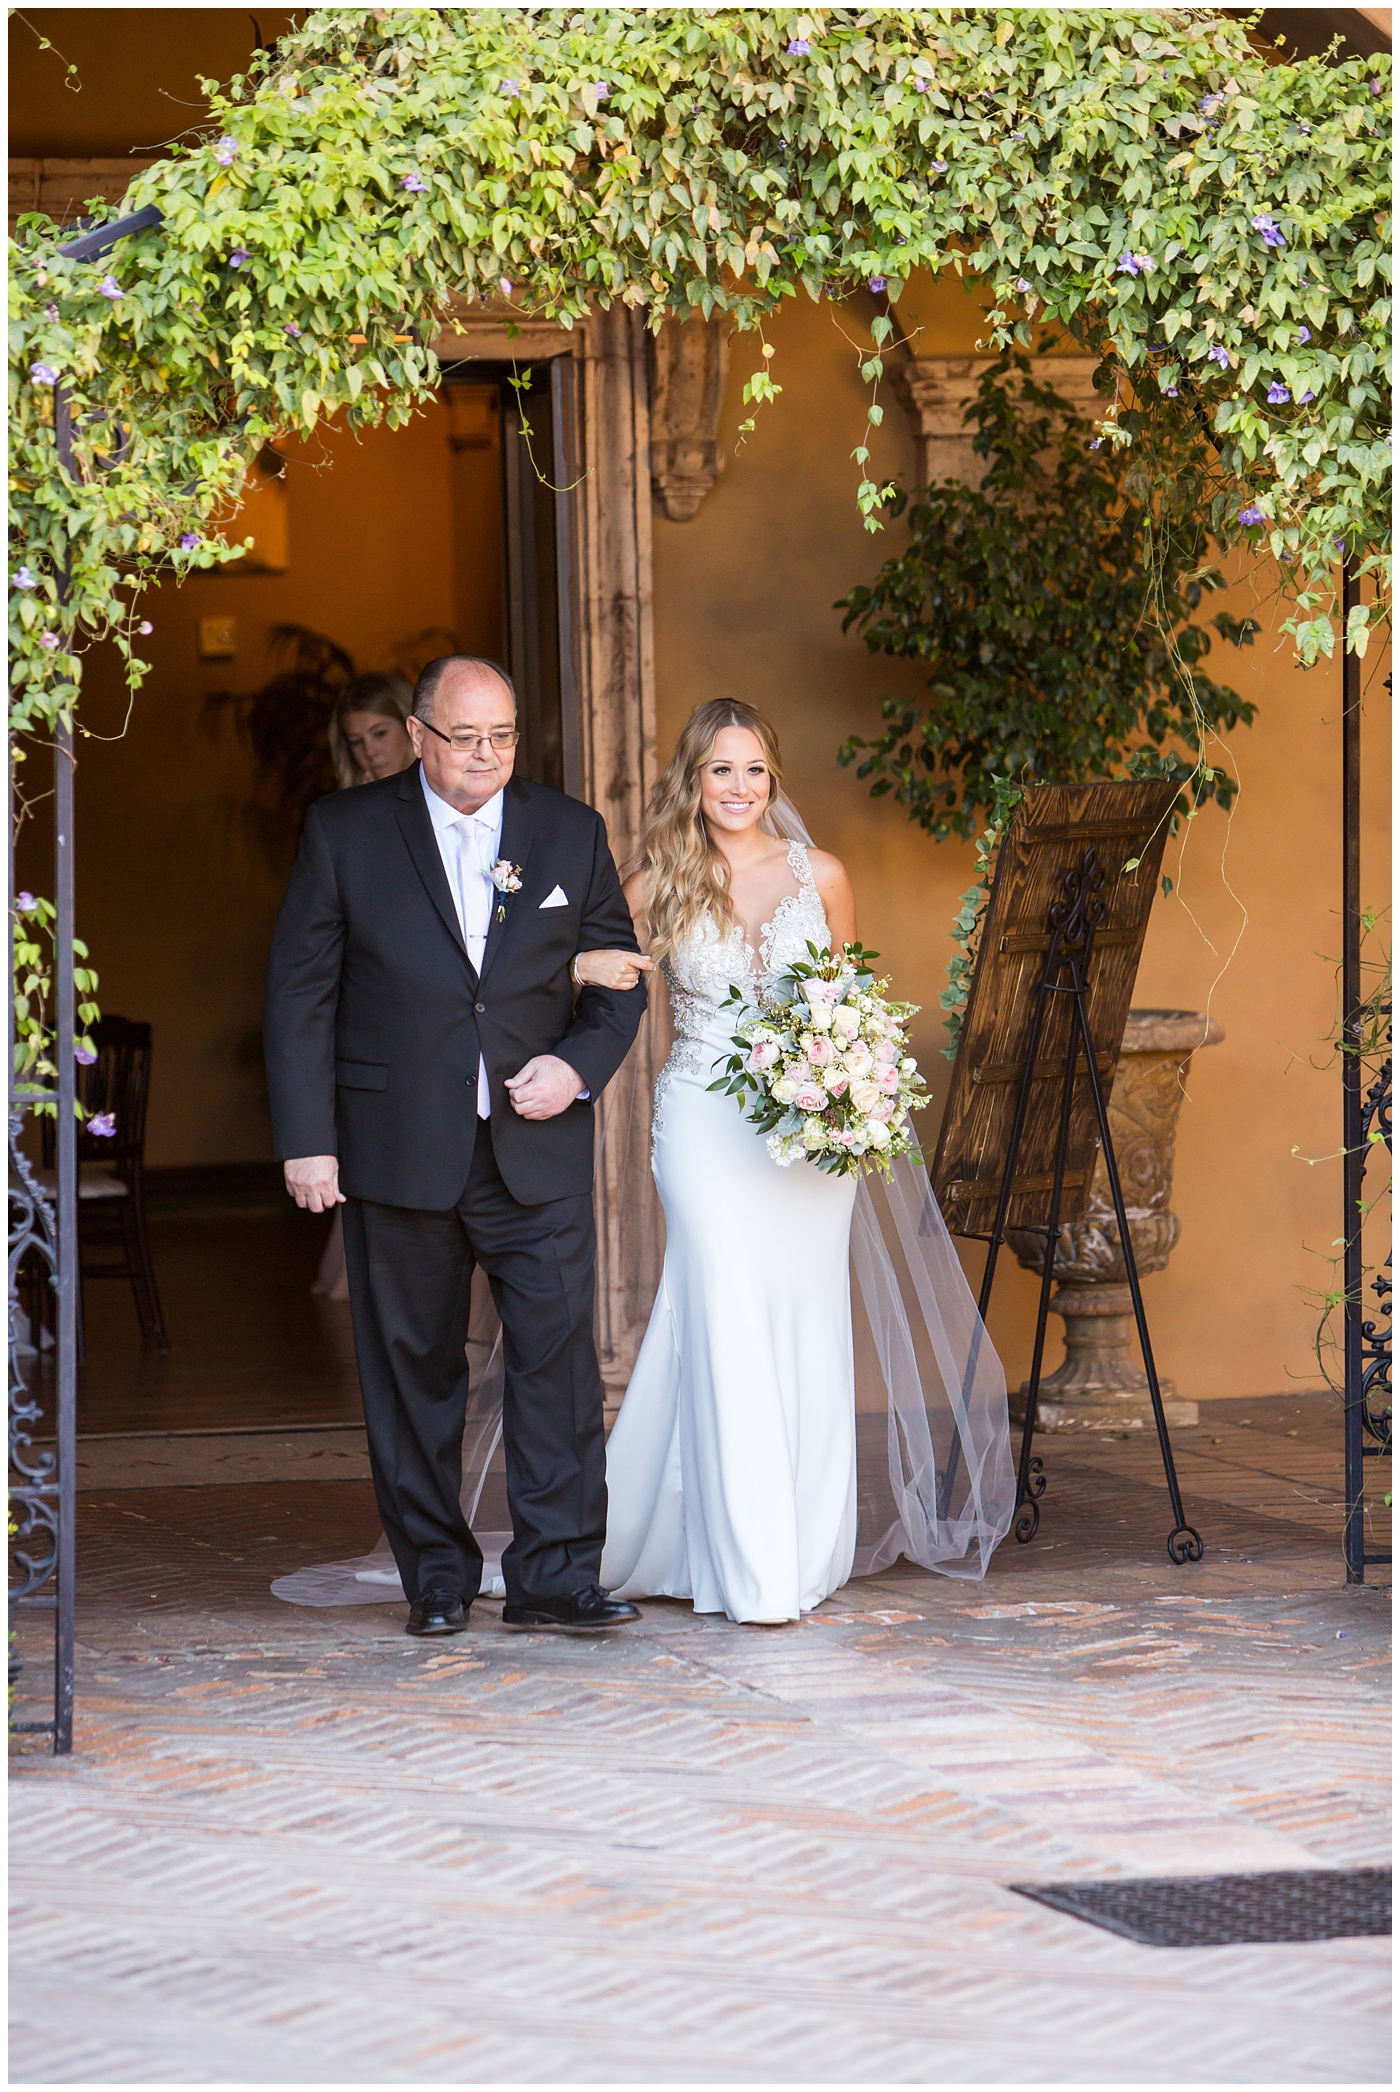 bride in lillian lottie couture strapped beaded wedding dress with organic blush, white and greenery bouquet walking down the aisle with father at outdoor wedding ceremony